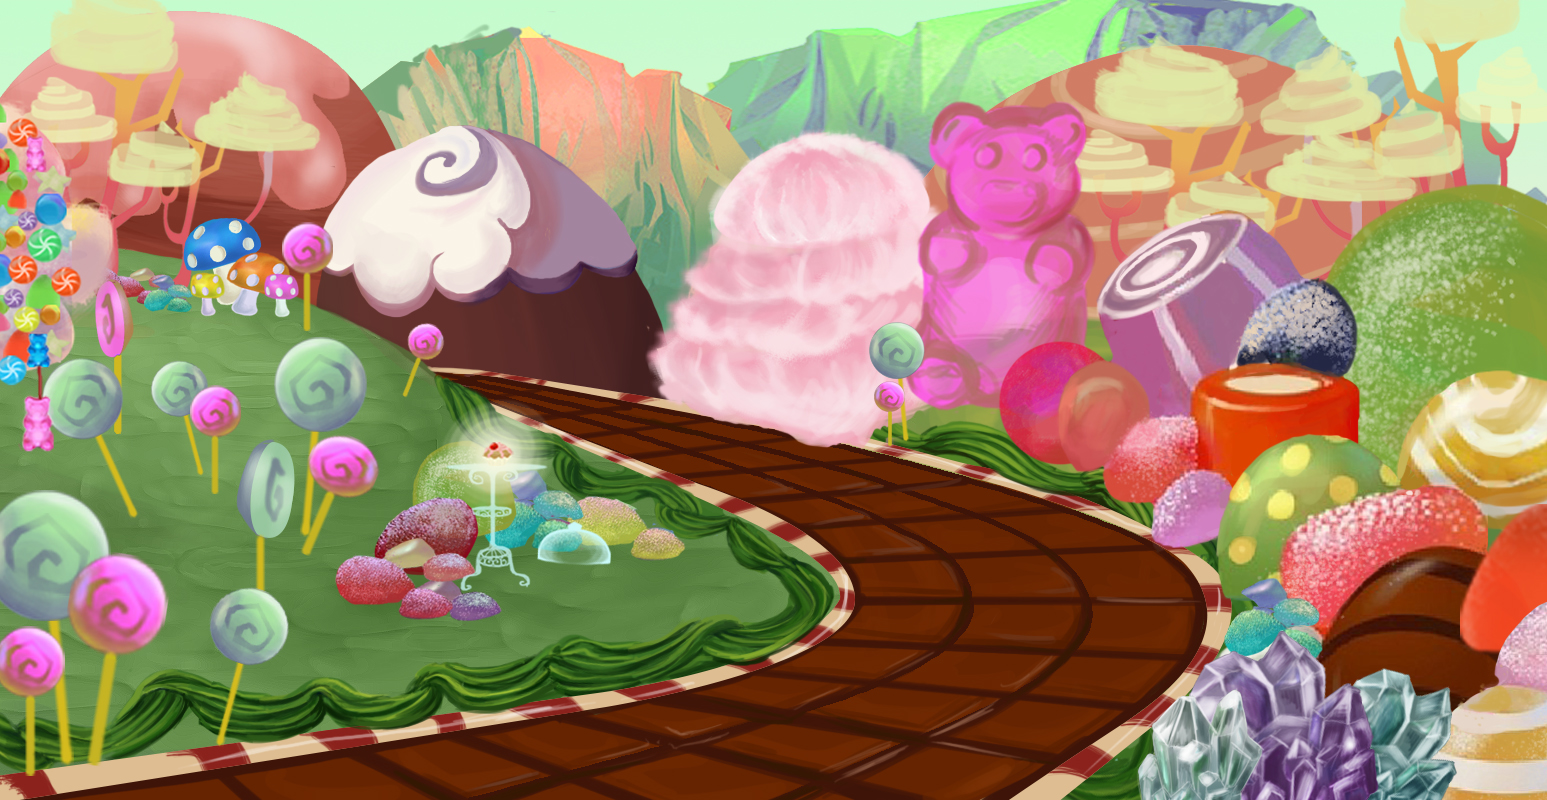 Candyland Background For My Production Class